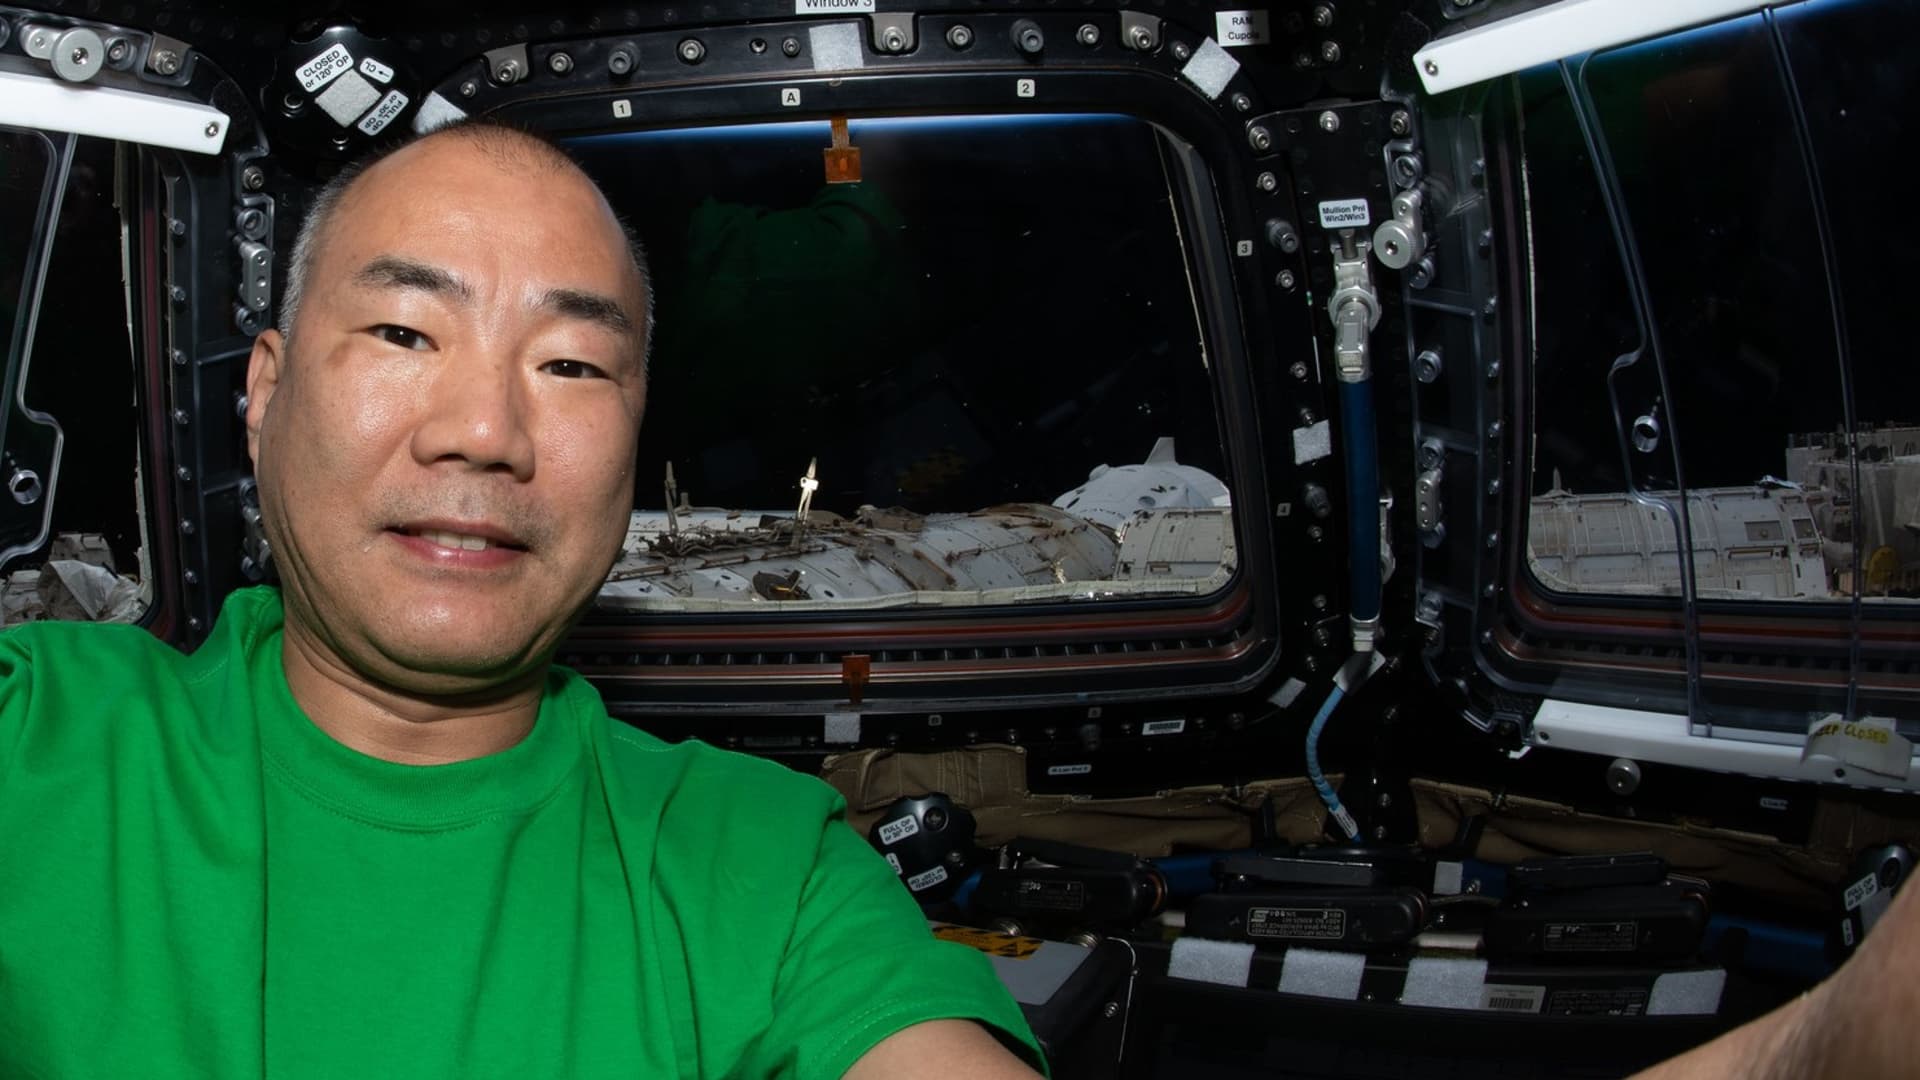 Japanese astronaut Soichi Noguchi poses in the International Space Station, with SpaceX's Crew Dragon capsule Resilience seen docked in the background.